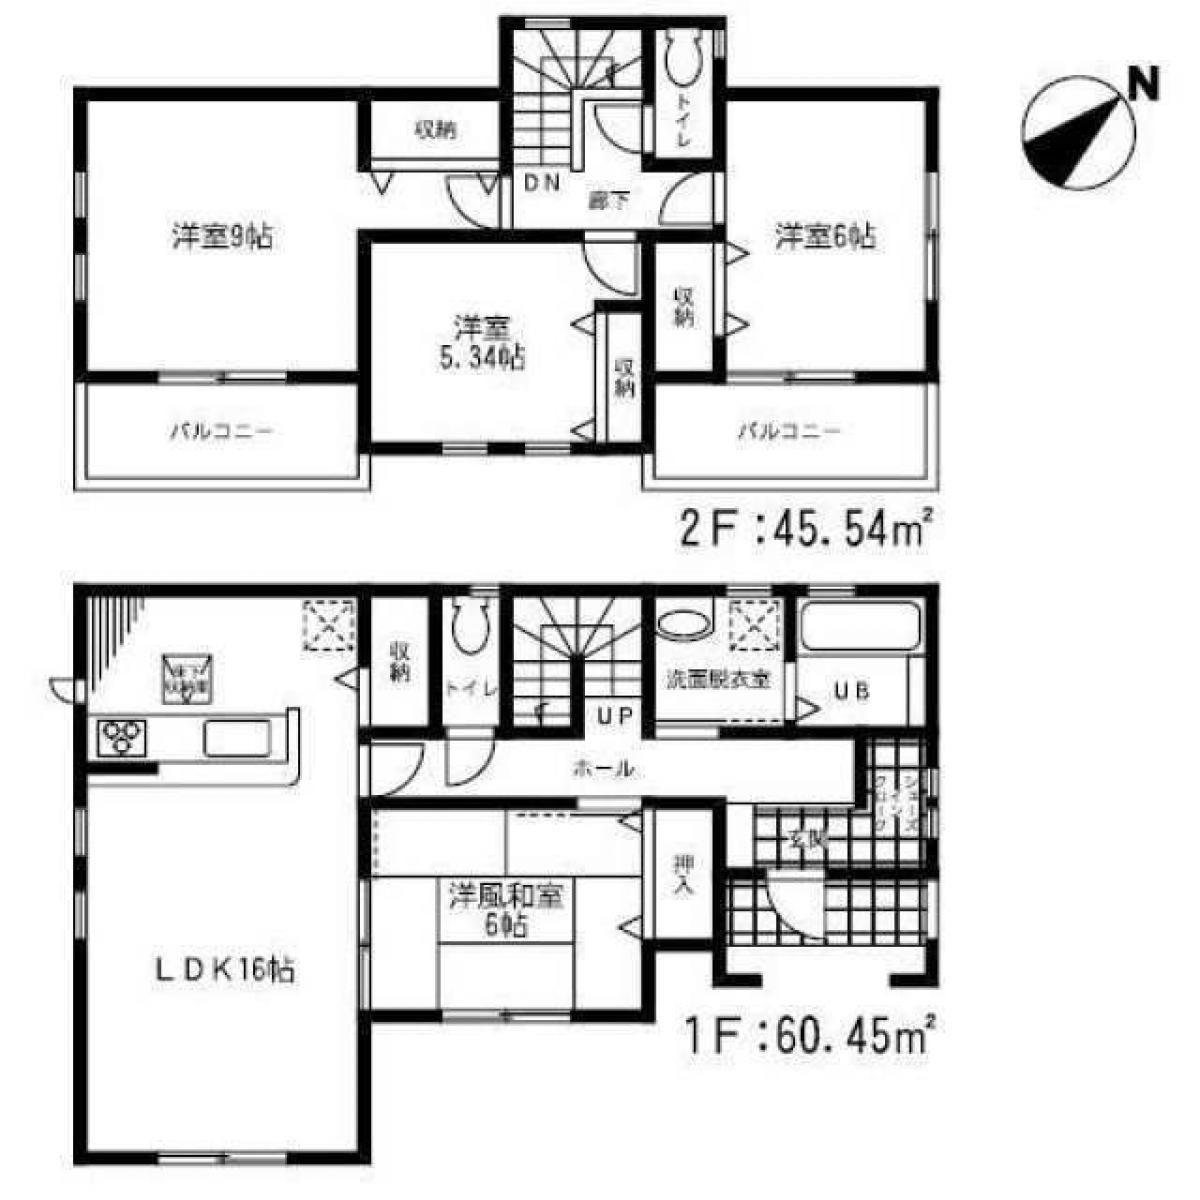 Picture of Home For Sale in Narita Shi, Chiba, Japan